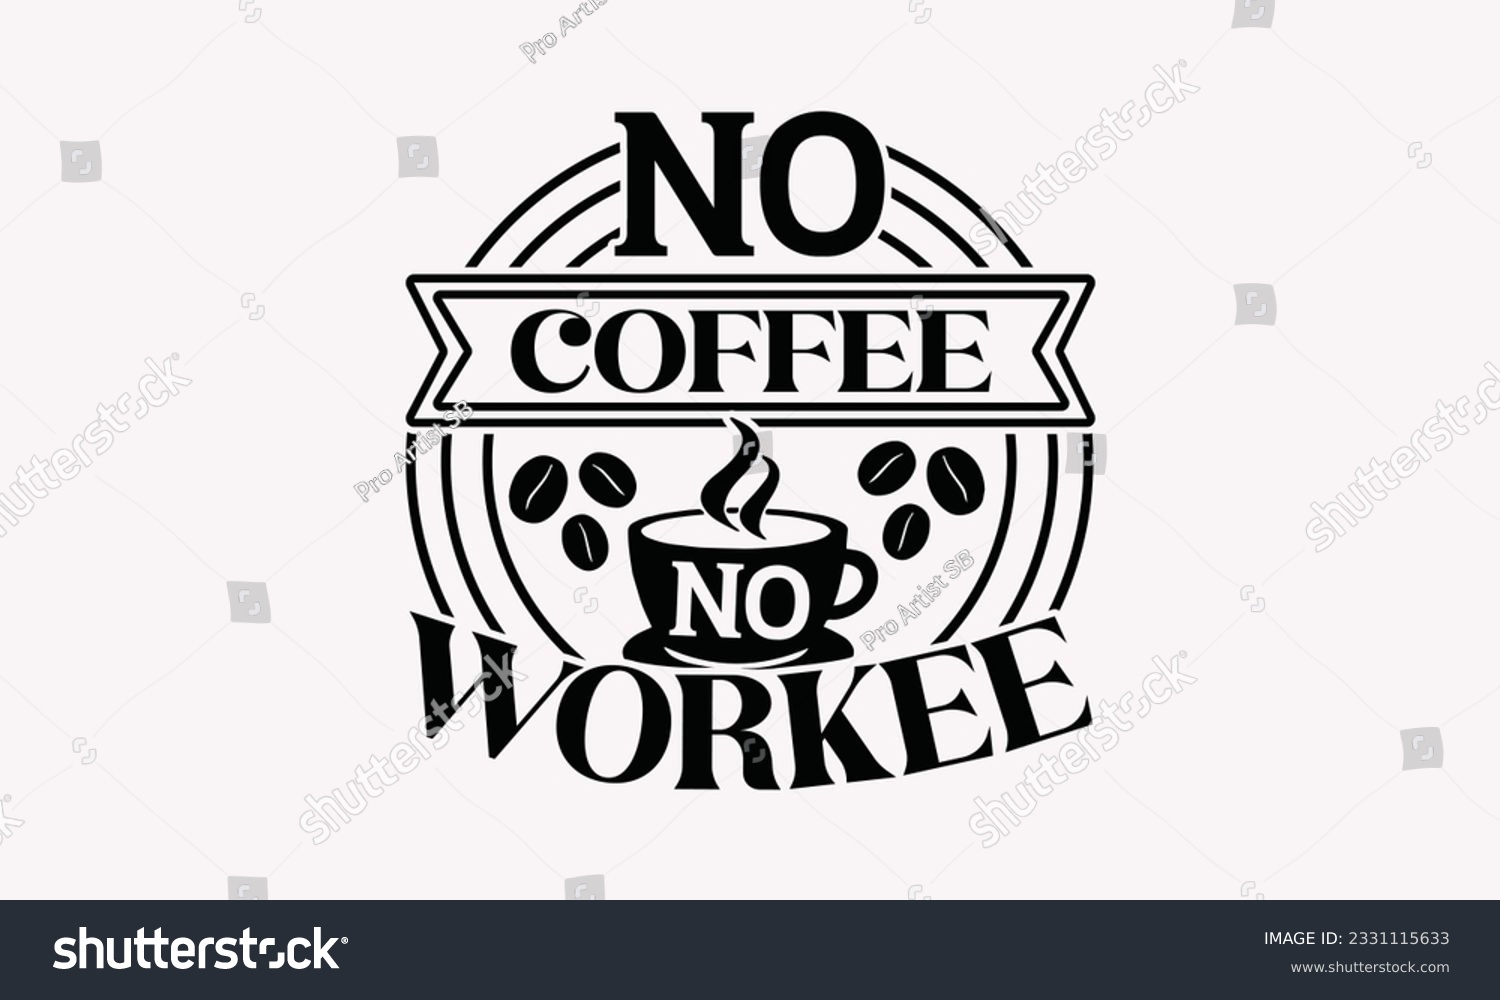 SVG of No coffee no workee - Coffee SVG Design Template, Cheer Quotes, Hand drawn lettering phrase, Isolated on white background. svg